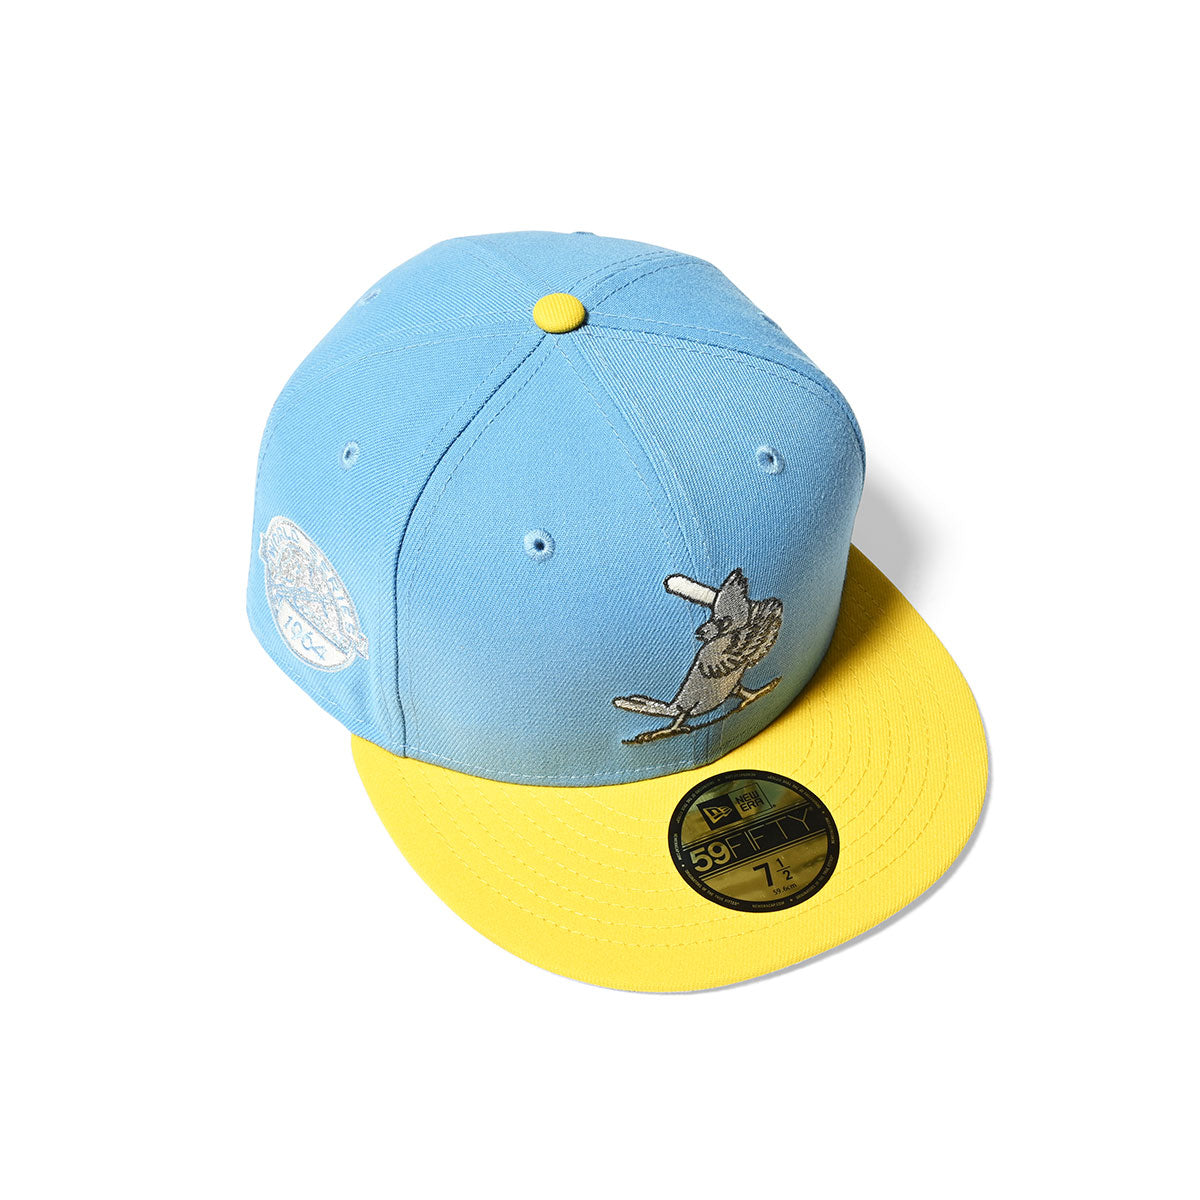 NEW ERA St.Louis Cardinals - 59FIFTY 1964 WS RADIANT BLUE/CYLW【70815002】